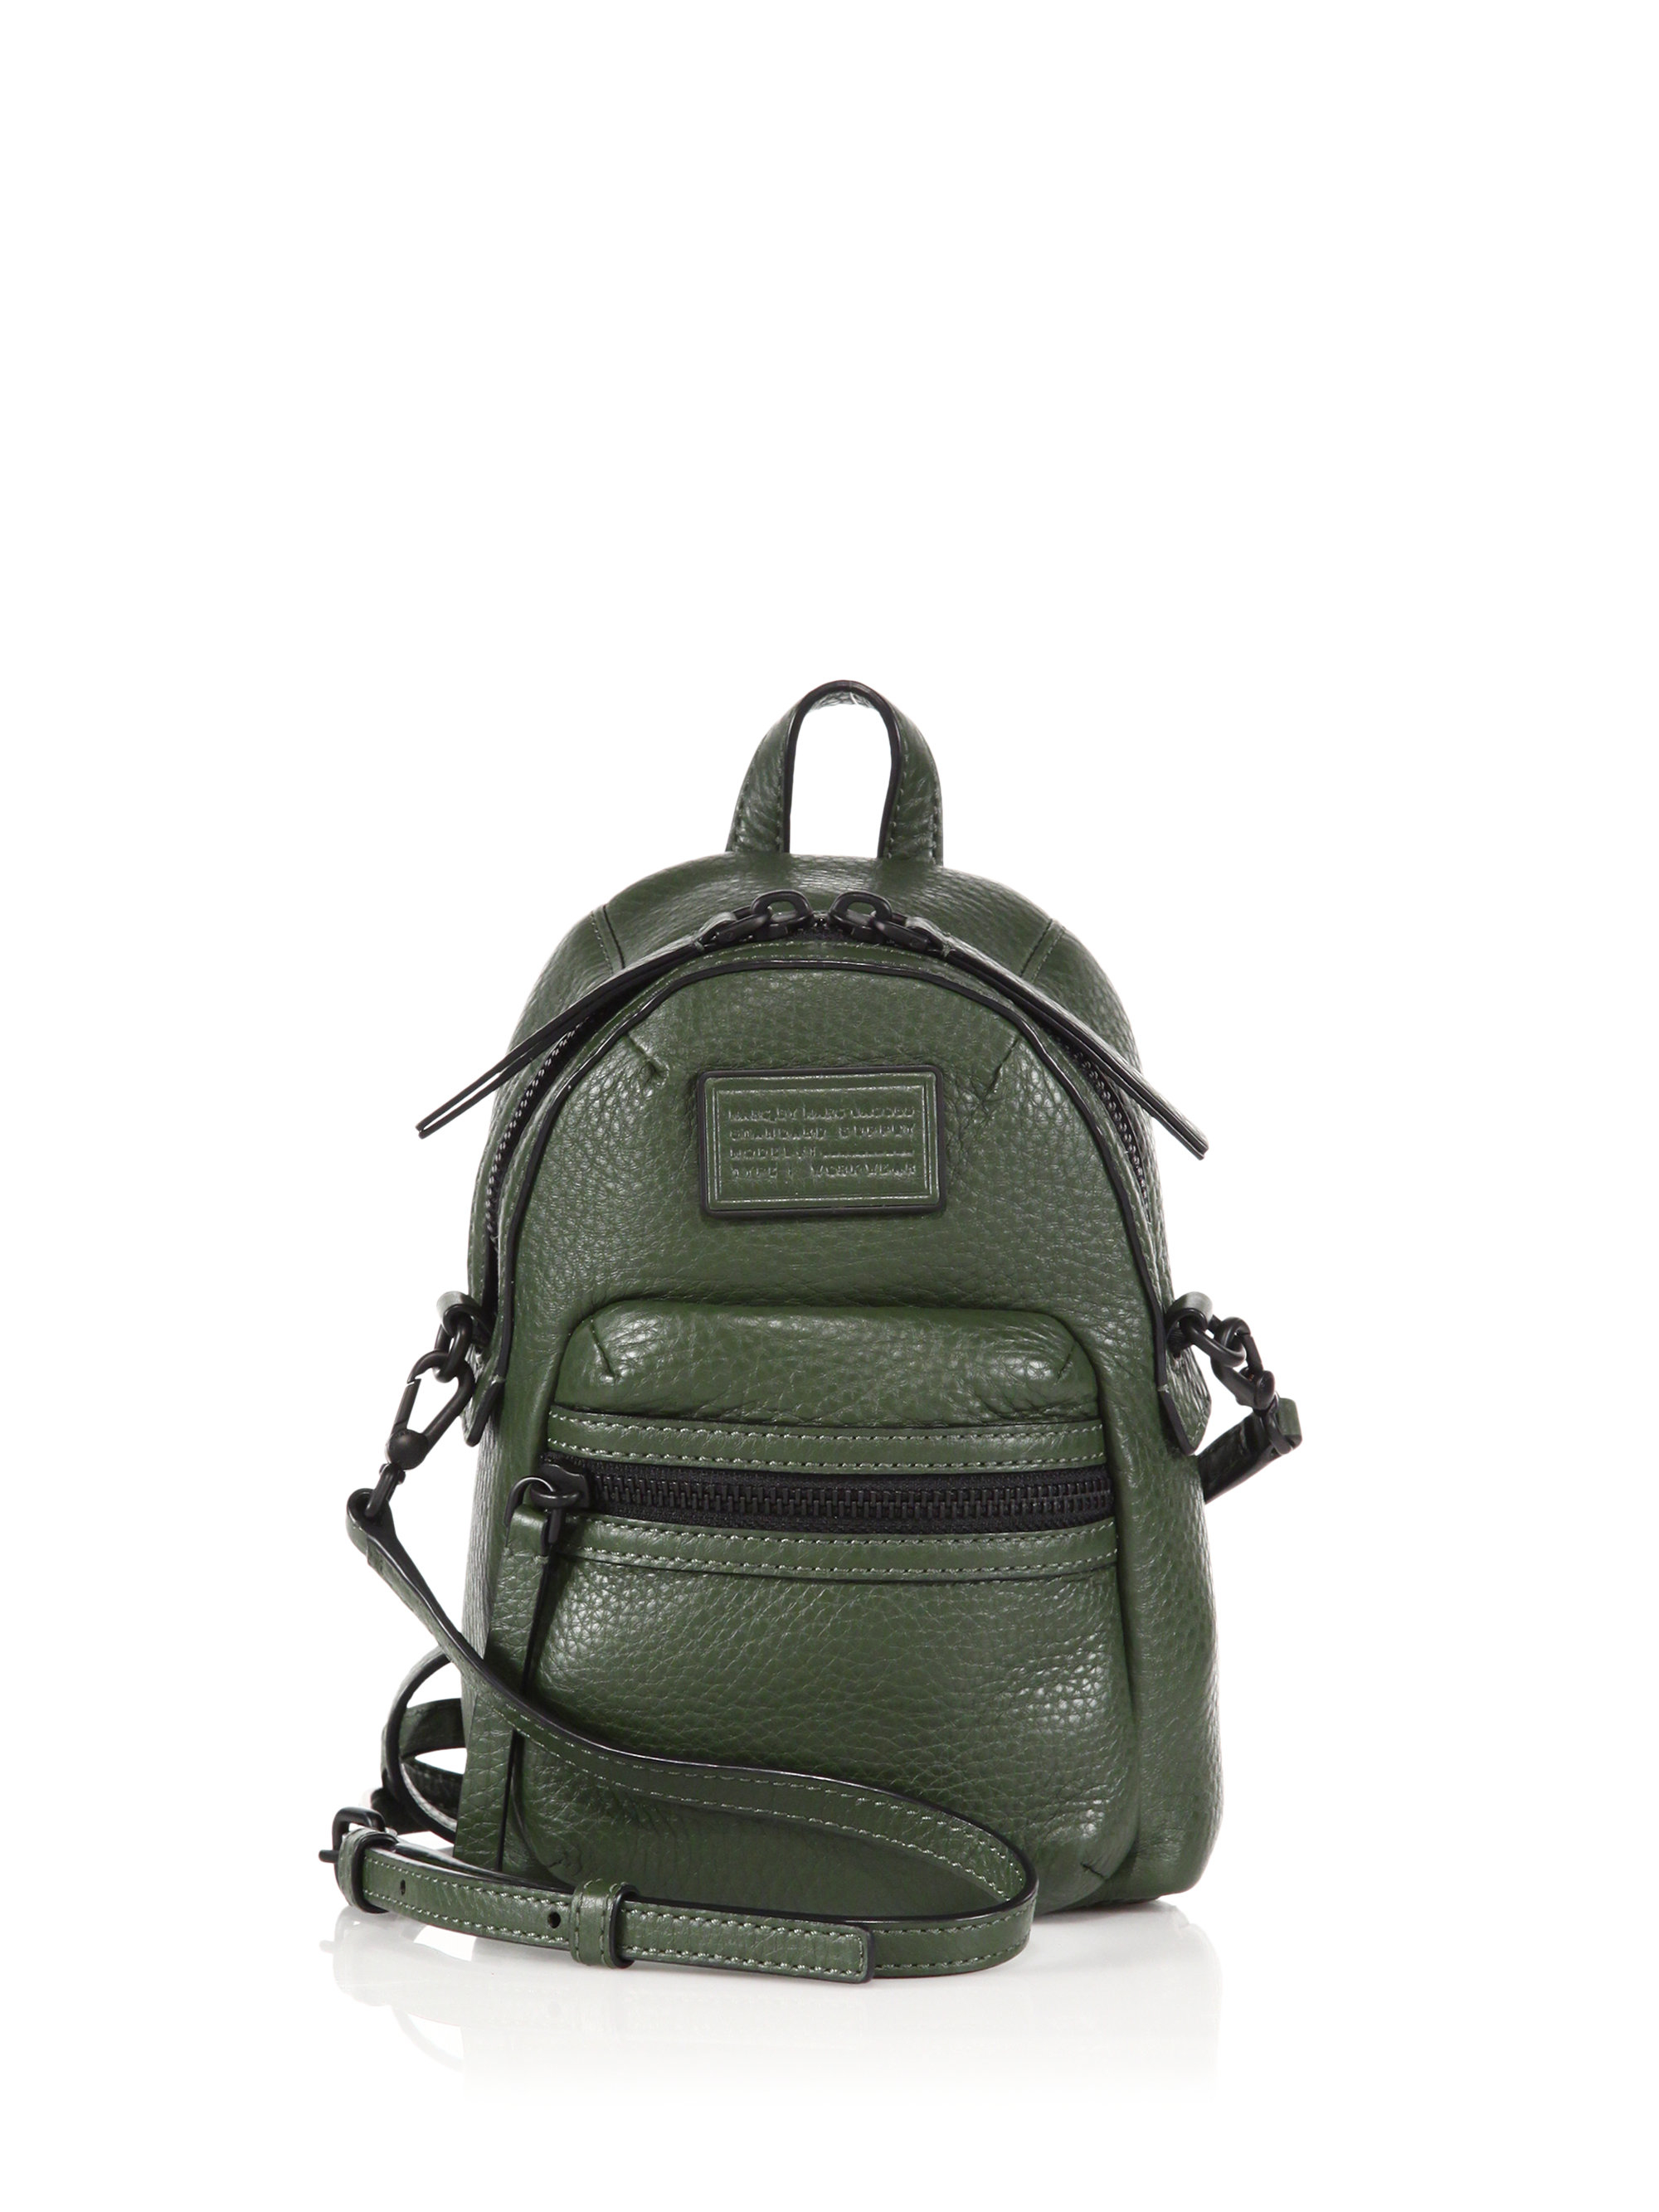 Marc By Marc Jacobs Domo Biker Mini Leather Backpack in Green - Lyst